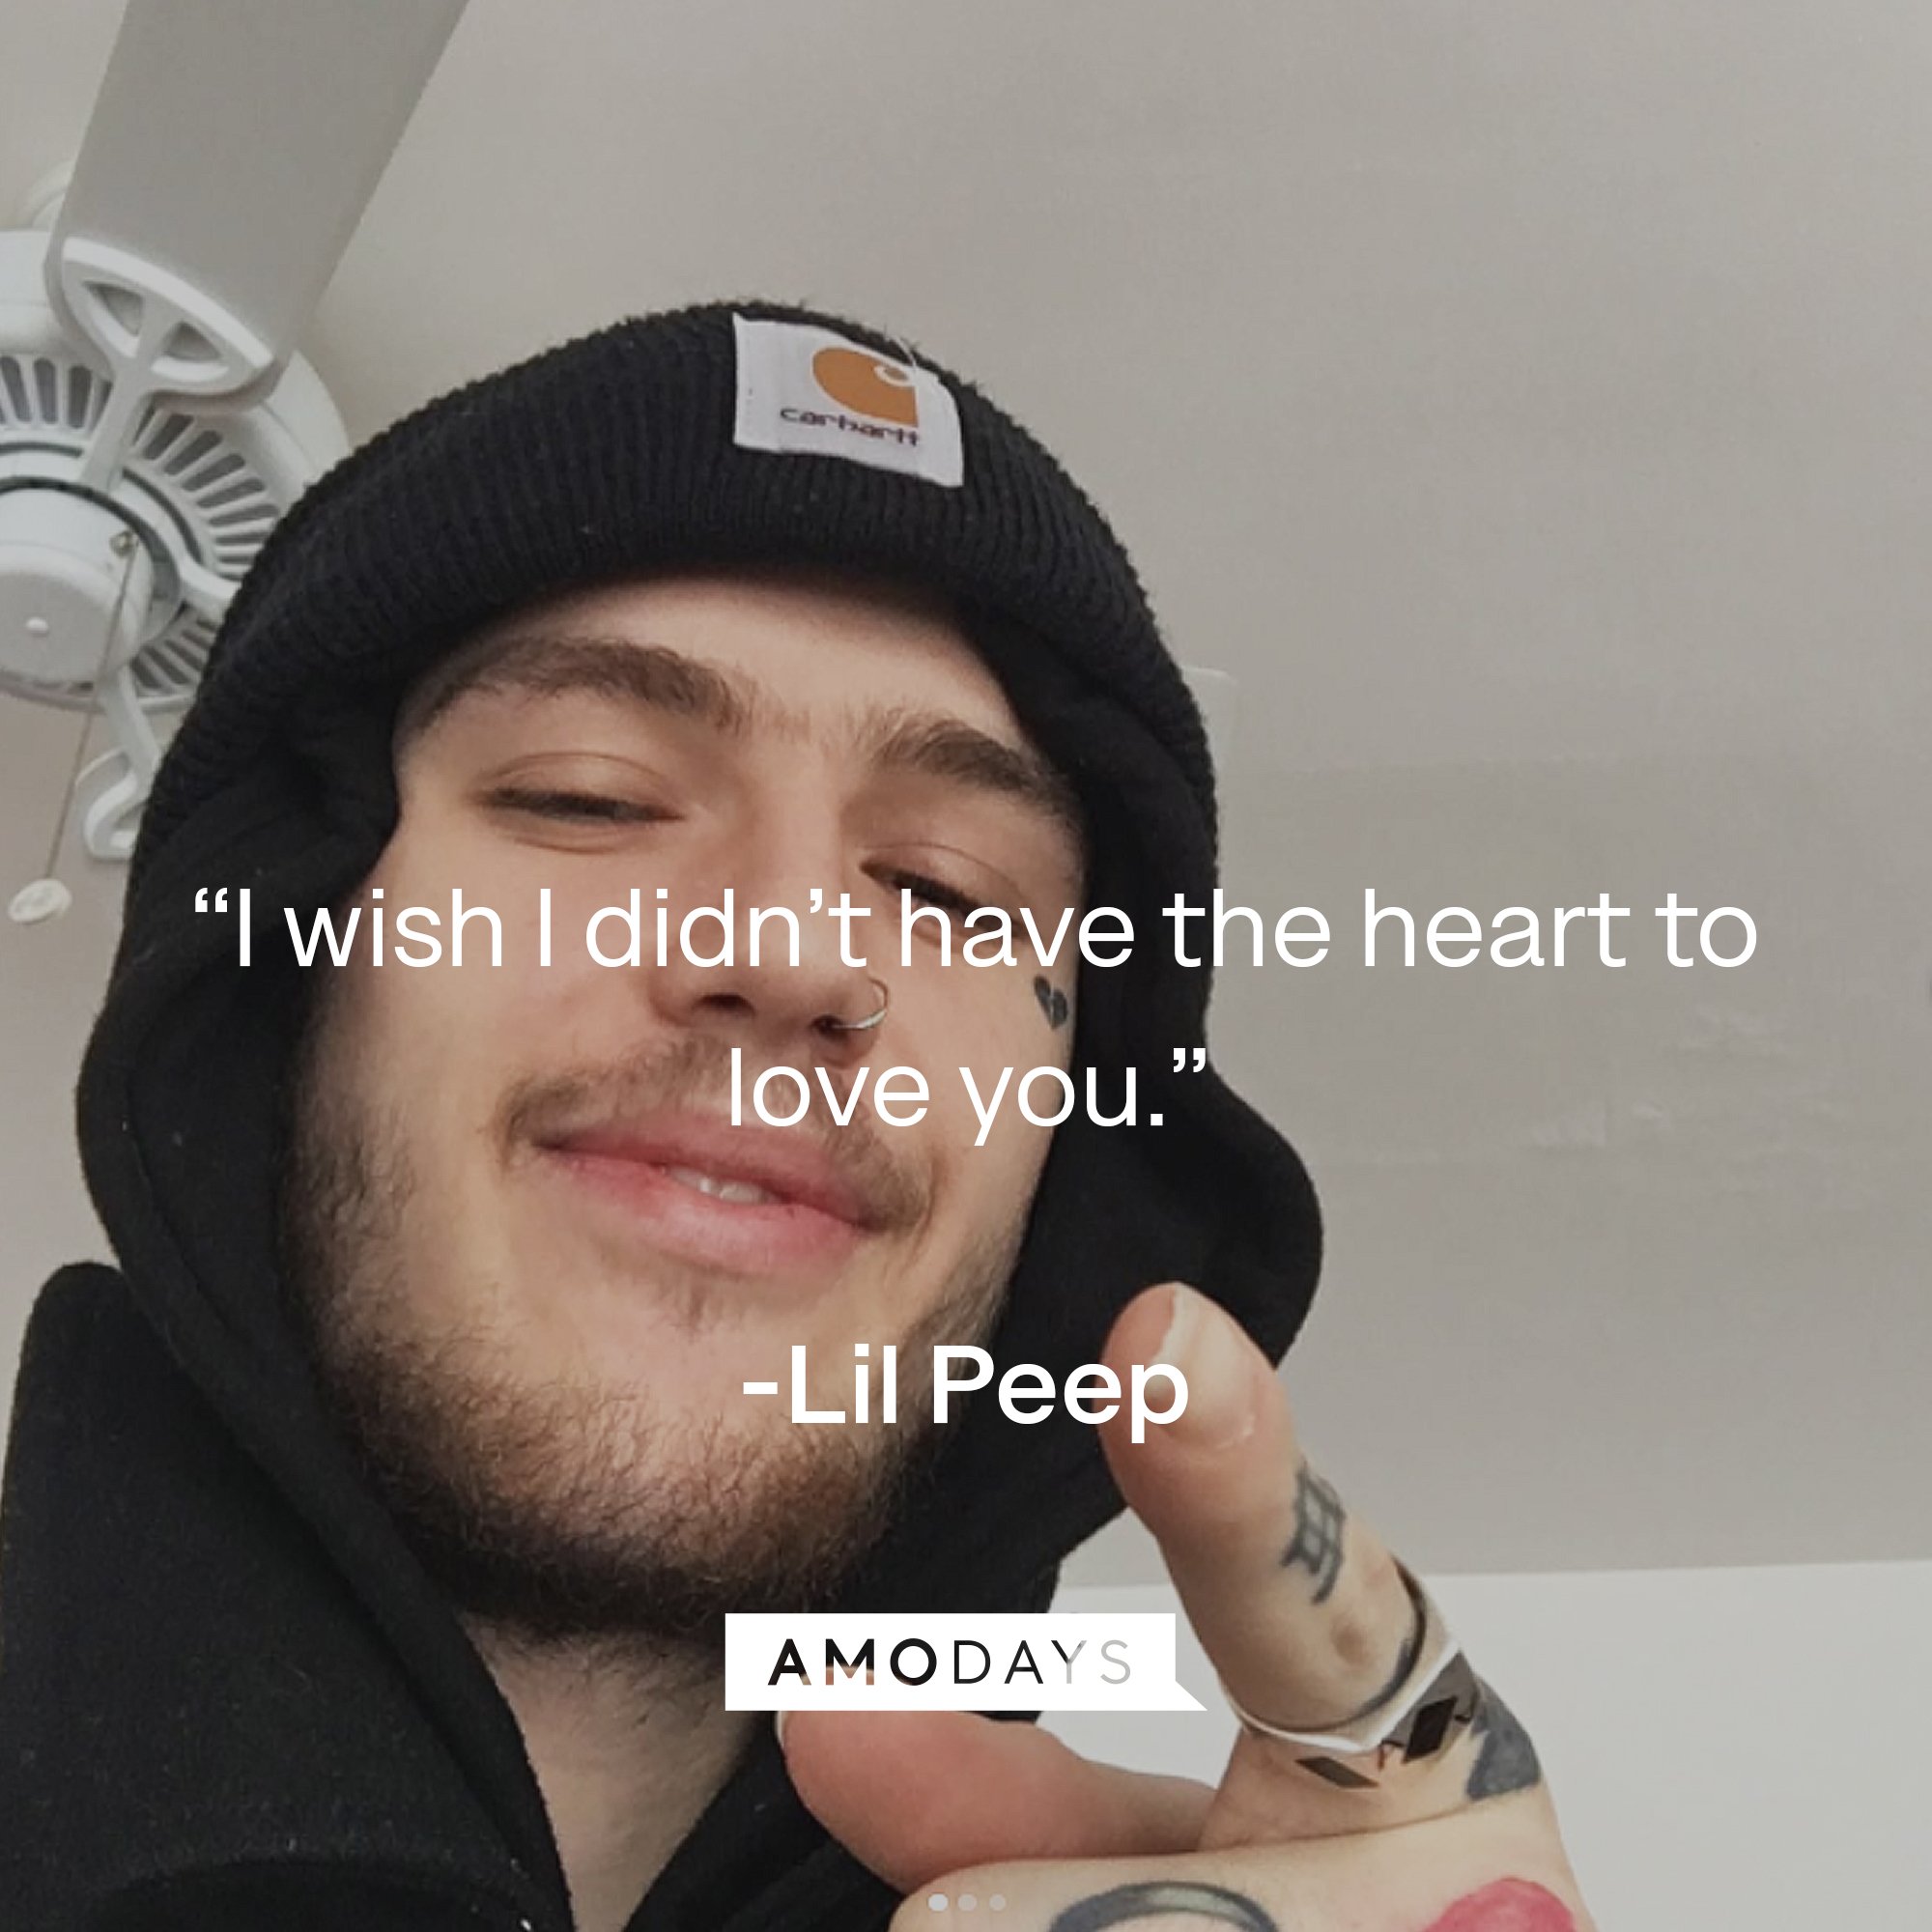 Lil Peep's quote: “I wish I didn’t have the heart to love you.” | Image: AmoDays